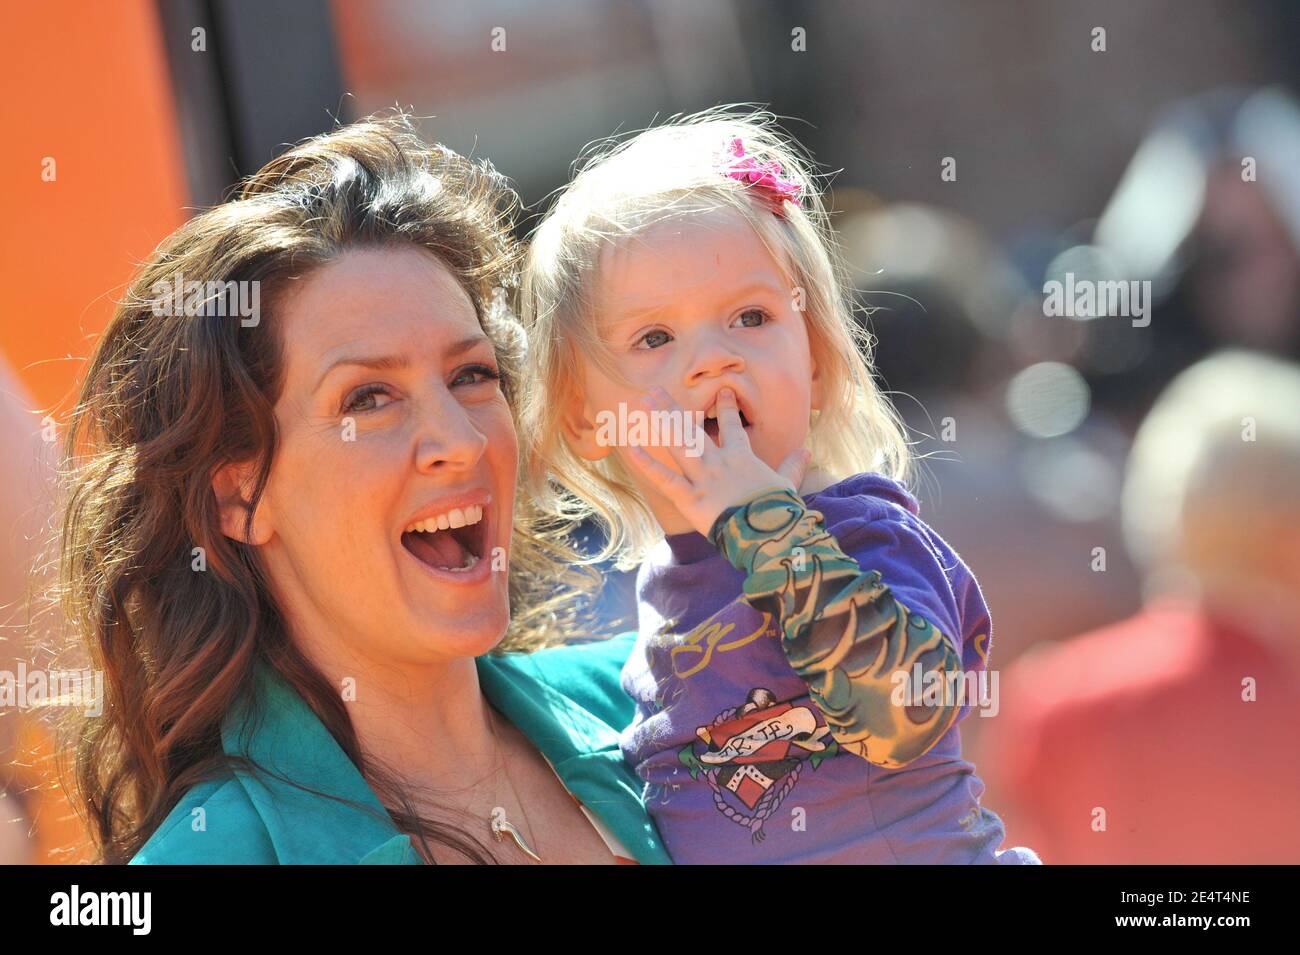 Joely Fisher and daughter attend the premiere of &quot;Dr. Seuss Horton Hears A Who!&quot; at The Mann Village Theater in Westwood. Los Angeles, March 8, 2008. (Pictured: Joely Fisher). Photo by Lionel Hahn/ABACAPRESS.COM Stock Photo